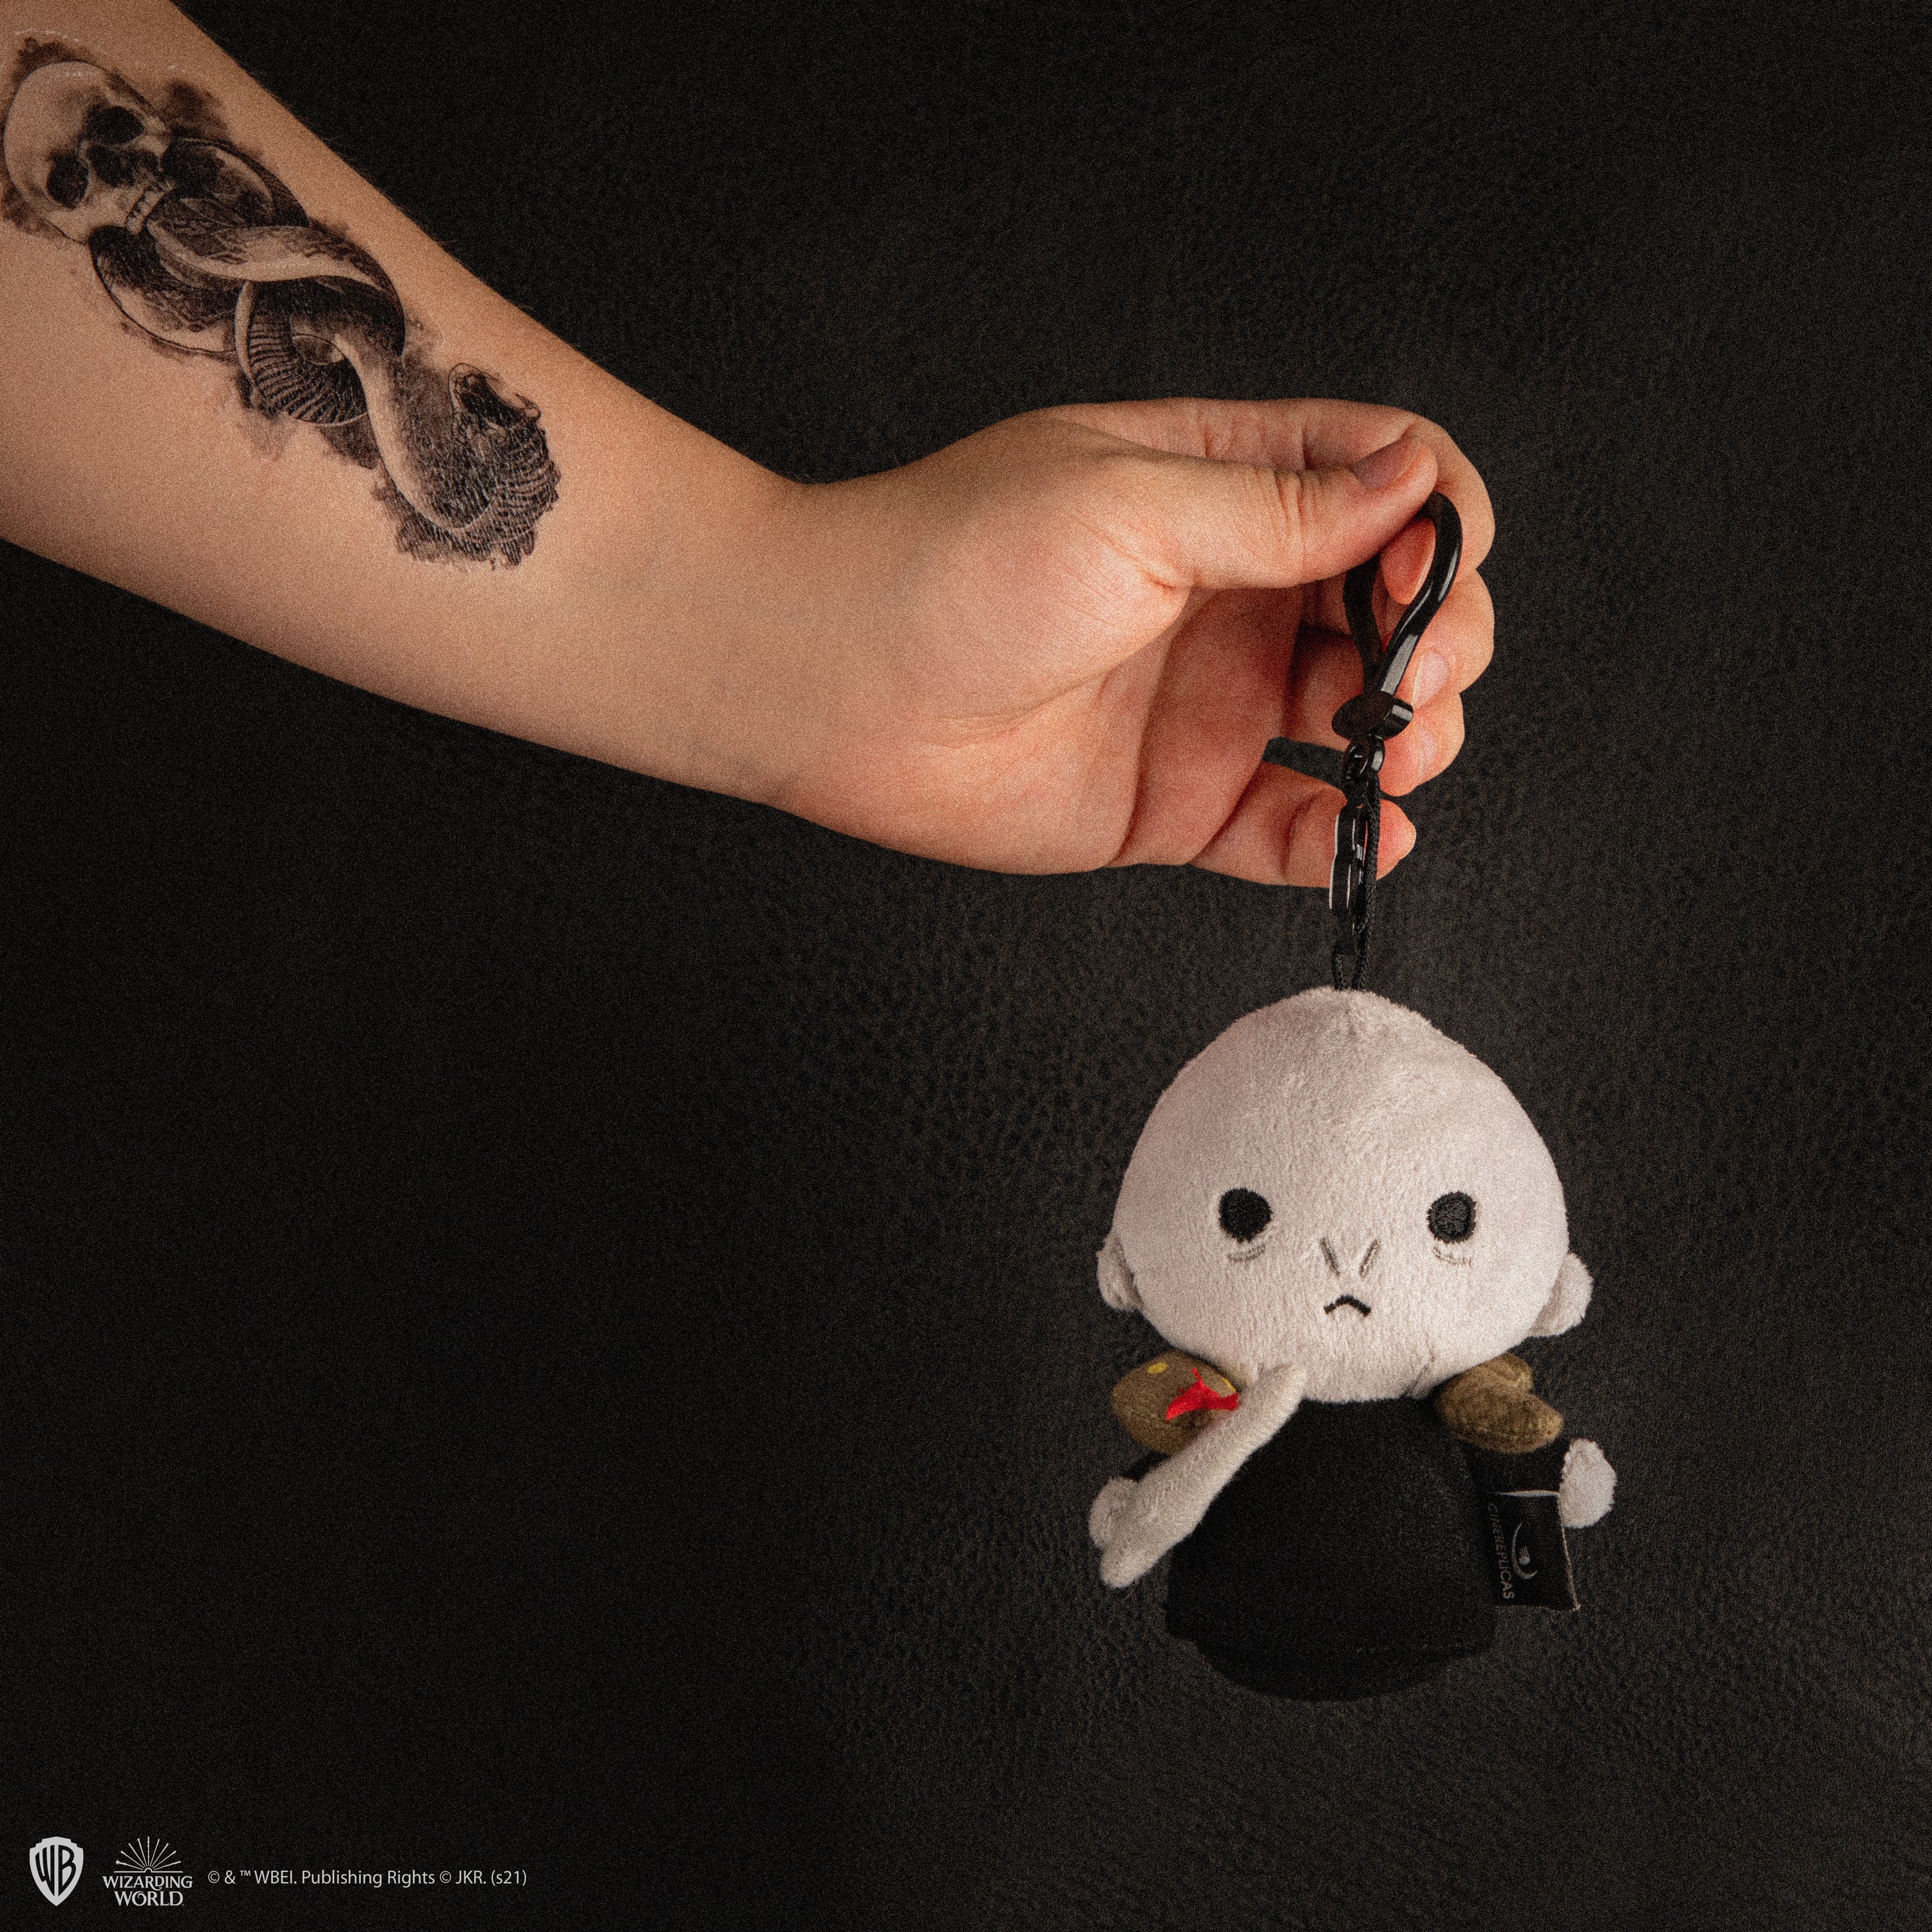 Harry Potter Design Collection – Lord Voldemort Doll